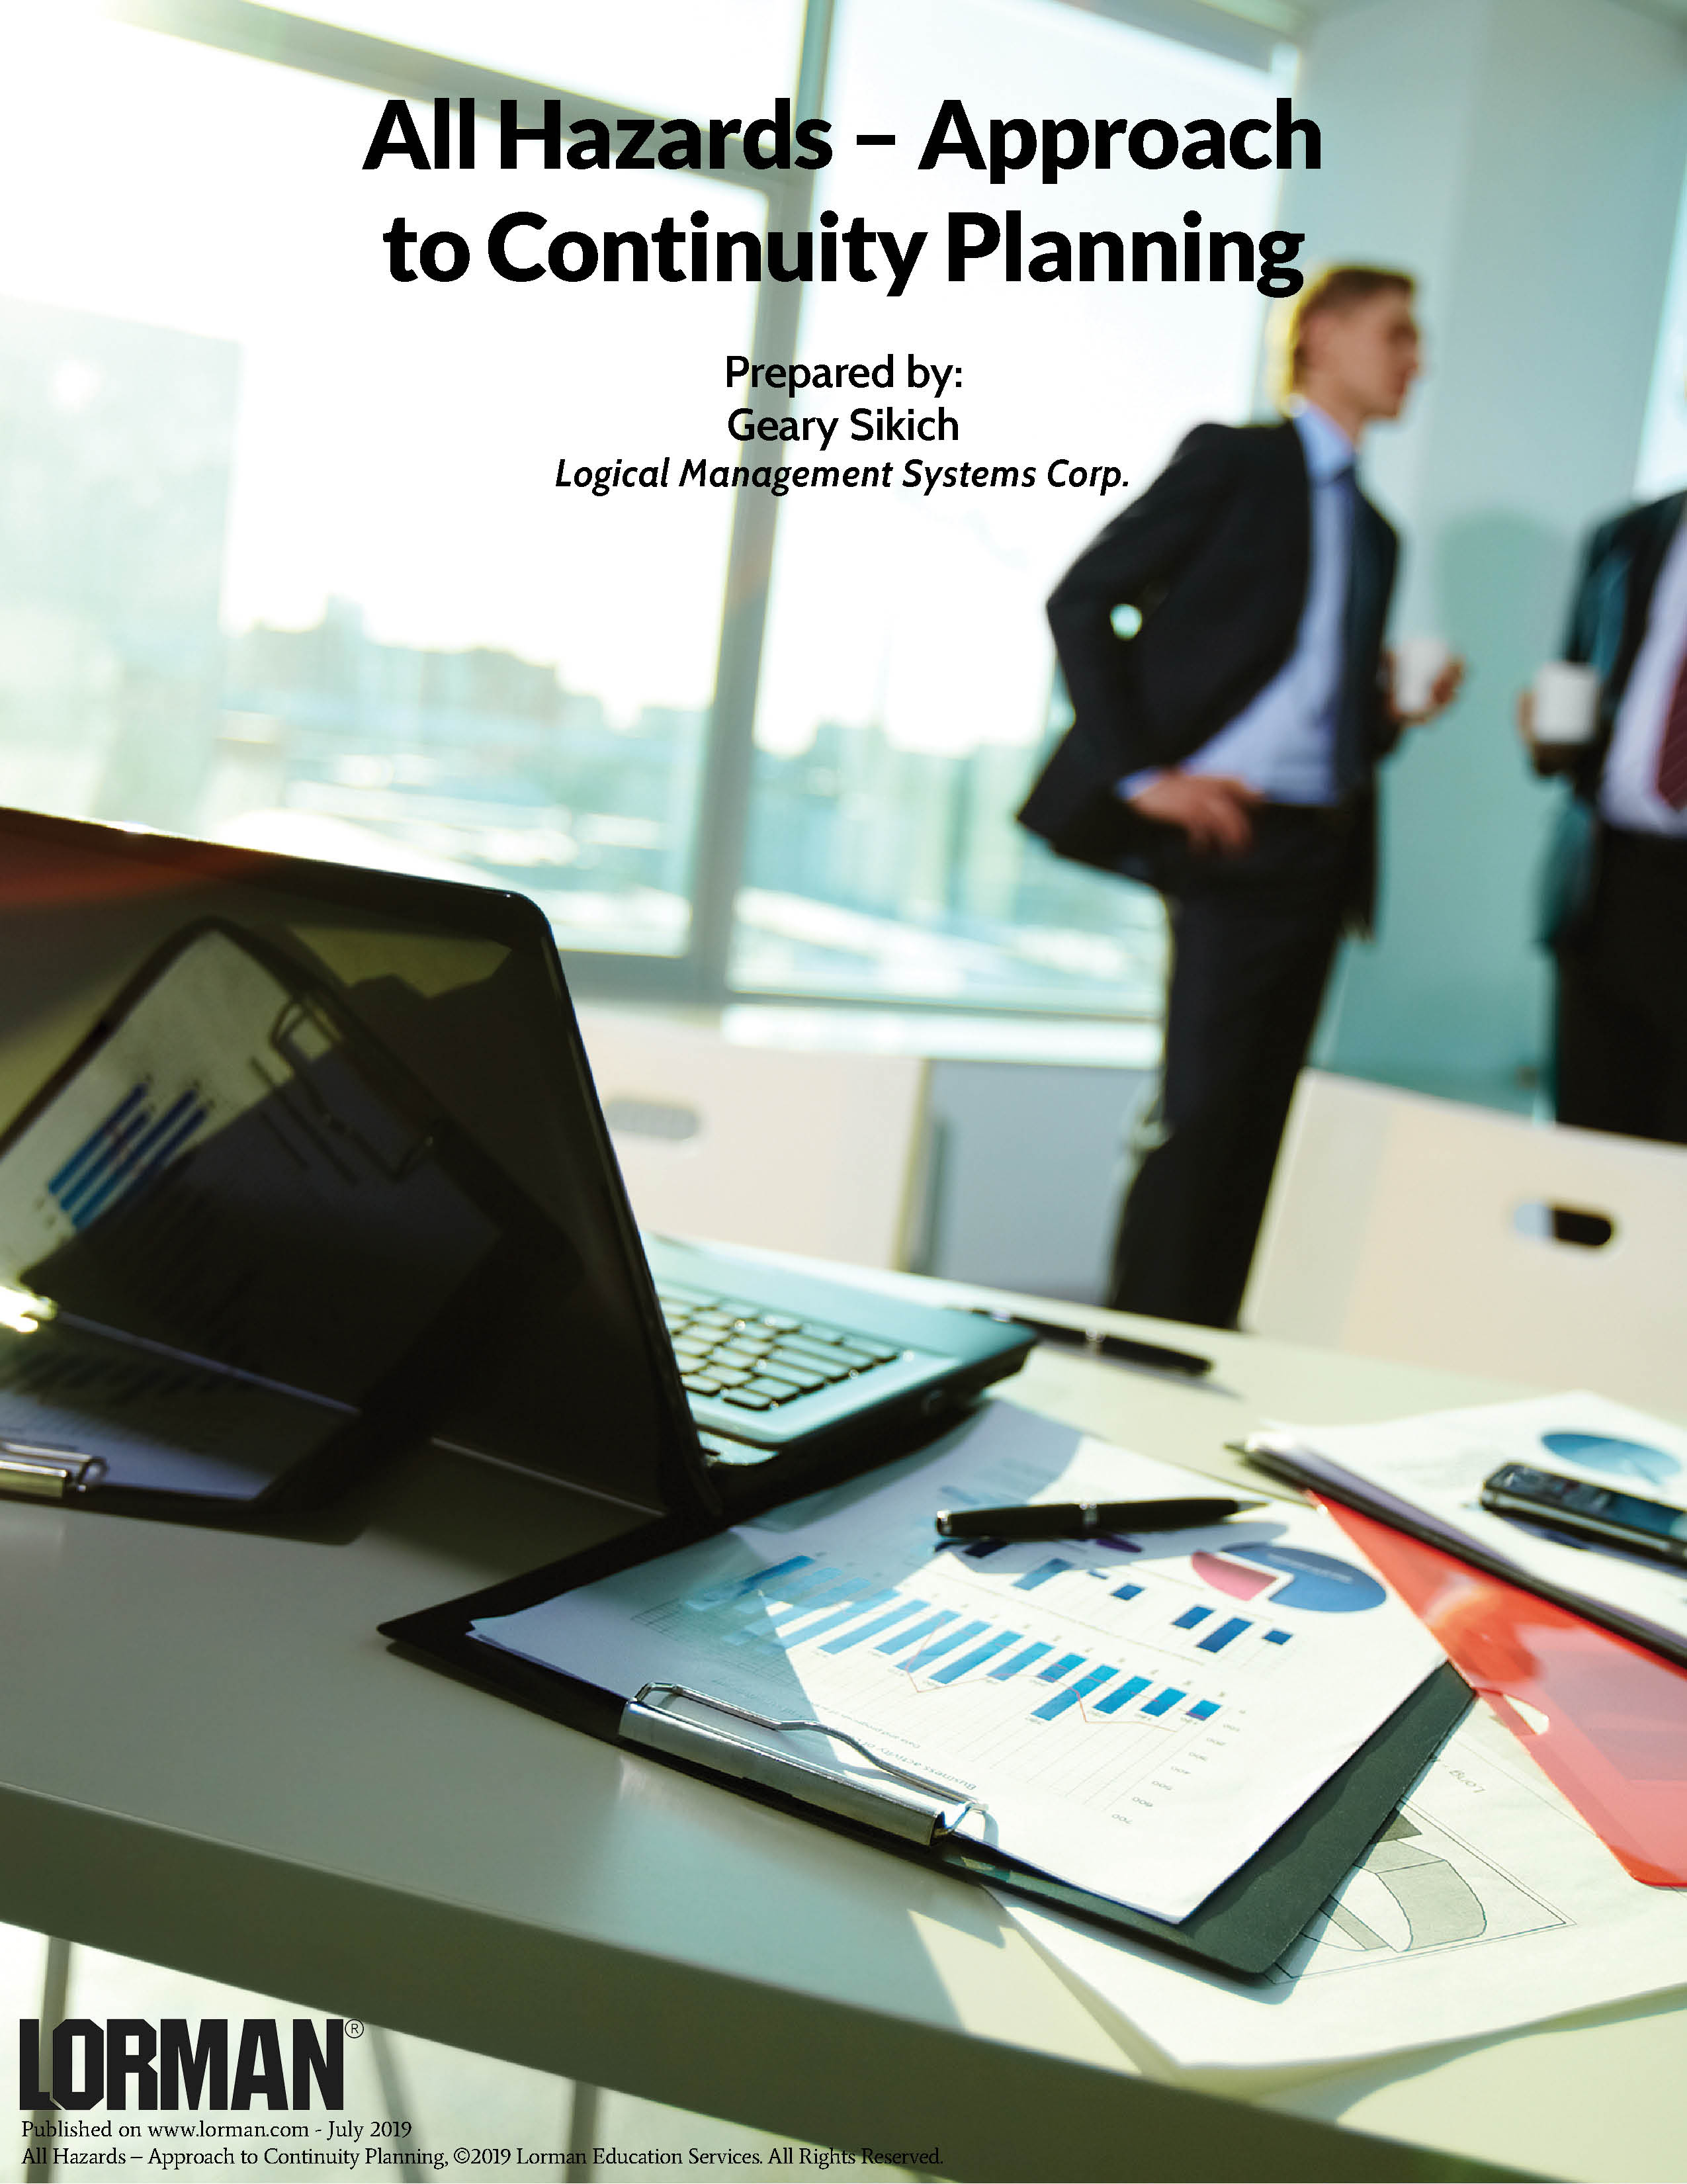 All Hazards - Approach to Continuity Planning